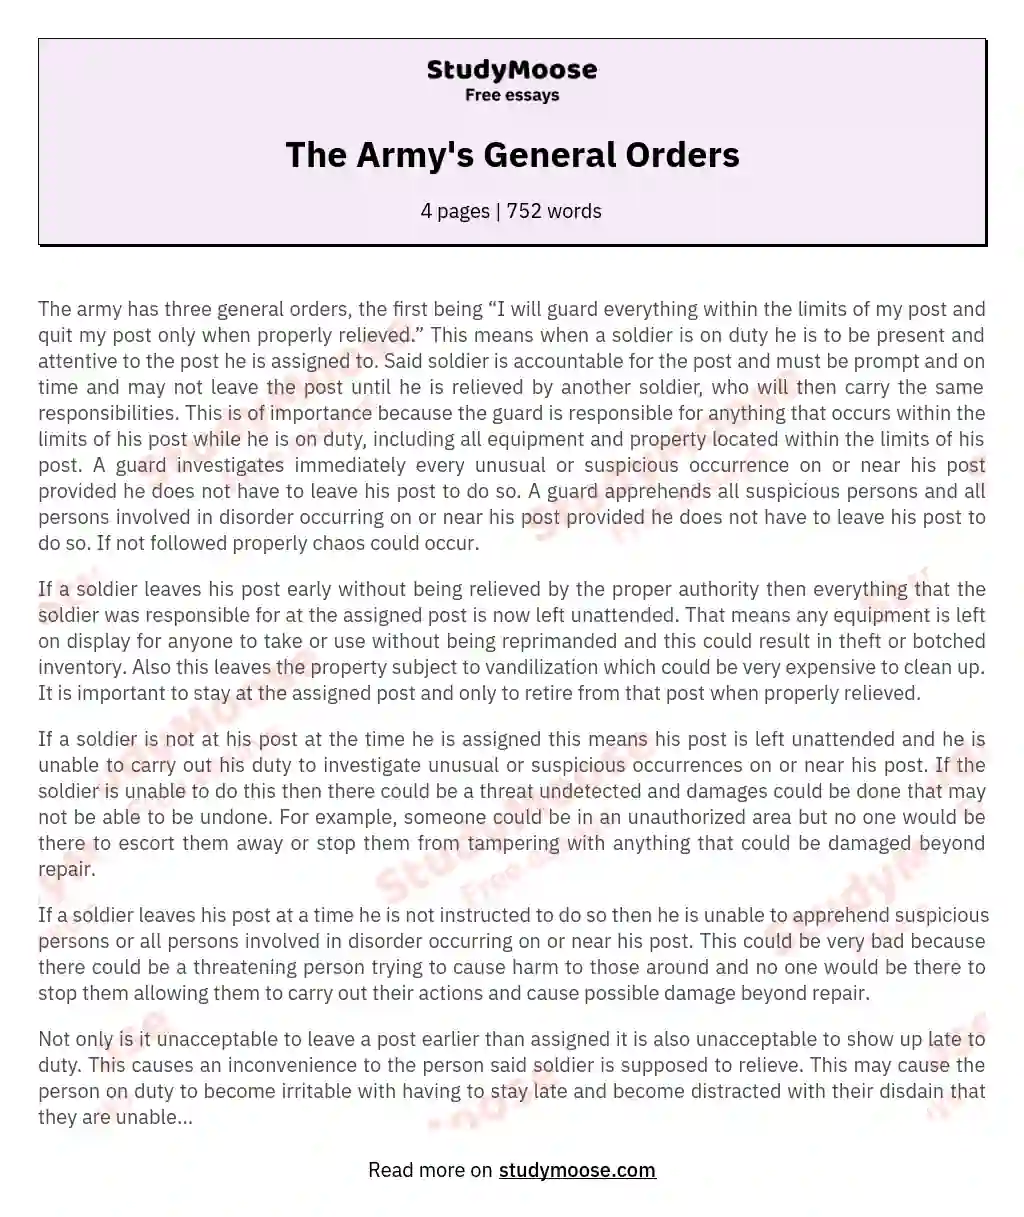 The Army's General Orders